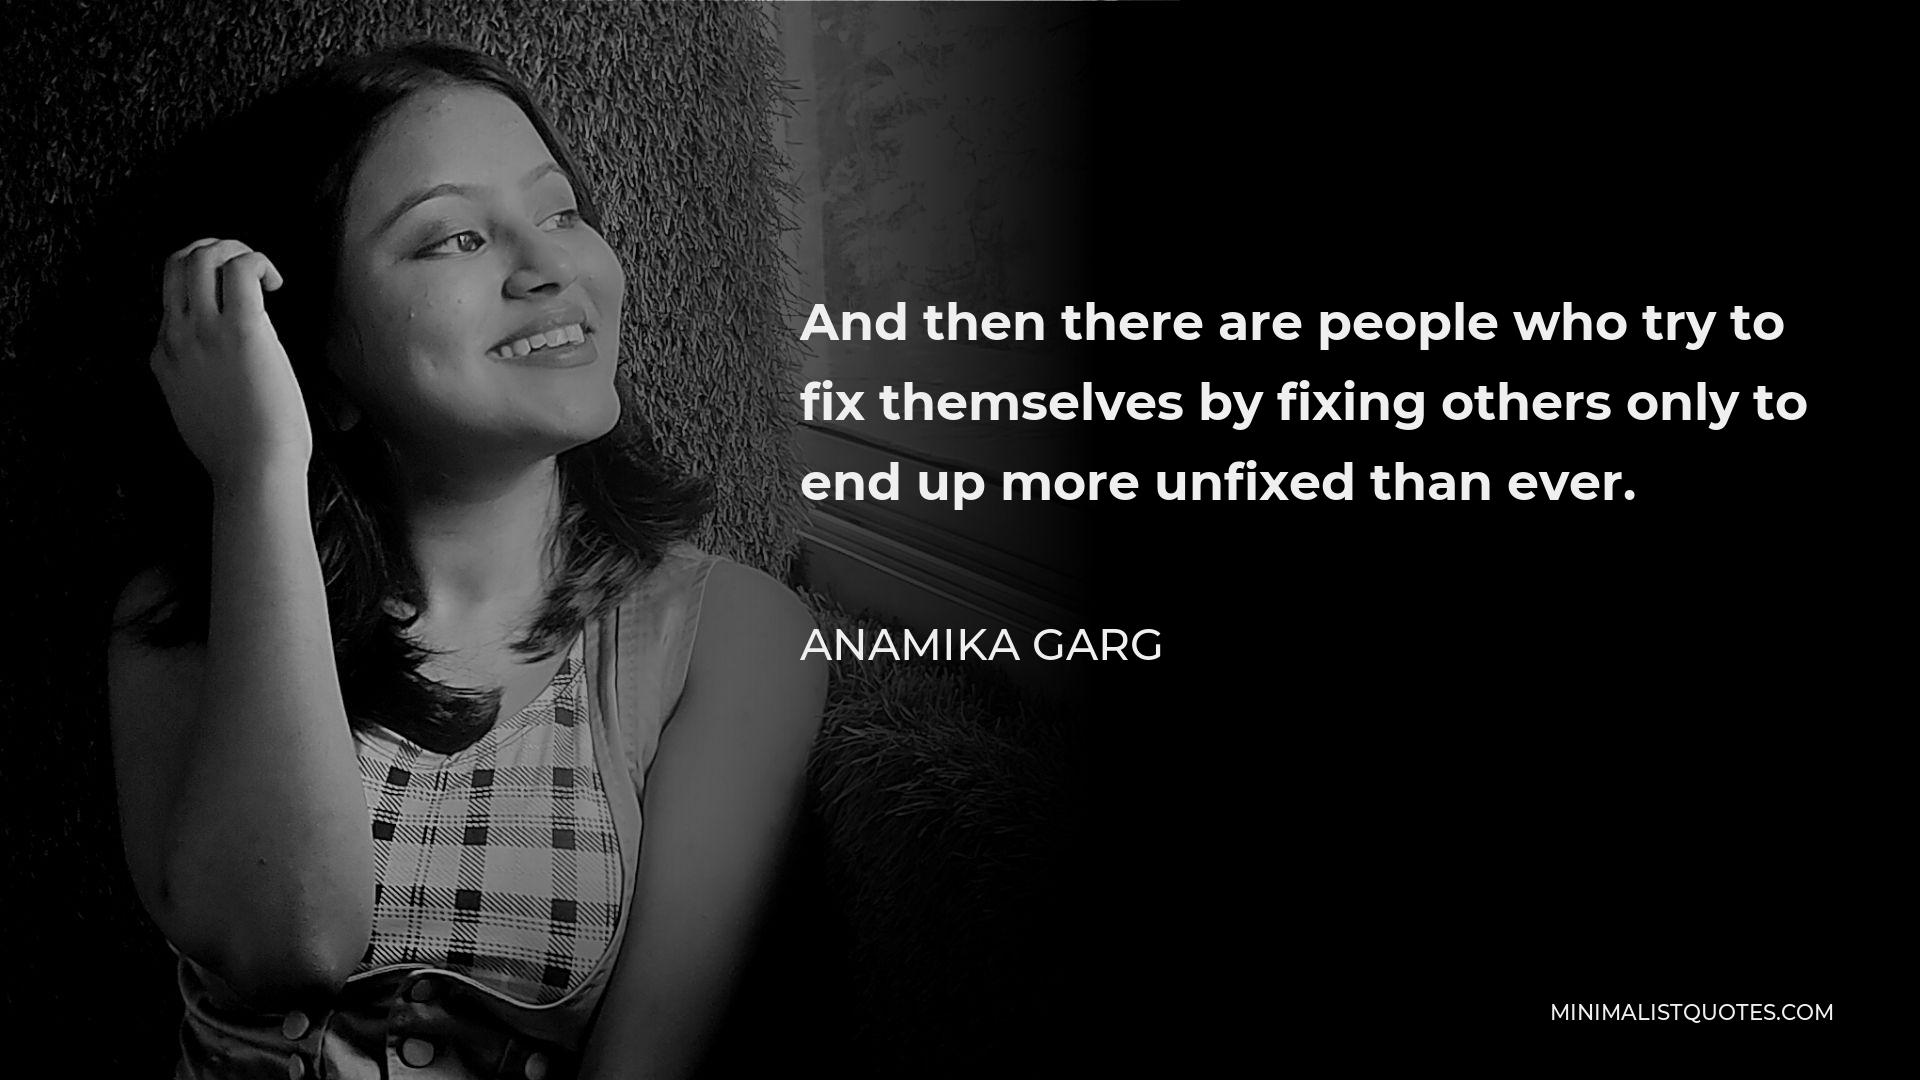 Anamika Garg Quote - And then there are people who try to fix themselves by fixing others only to end up more unfixed than ever.